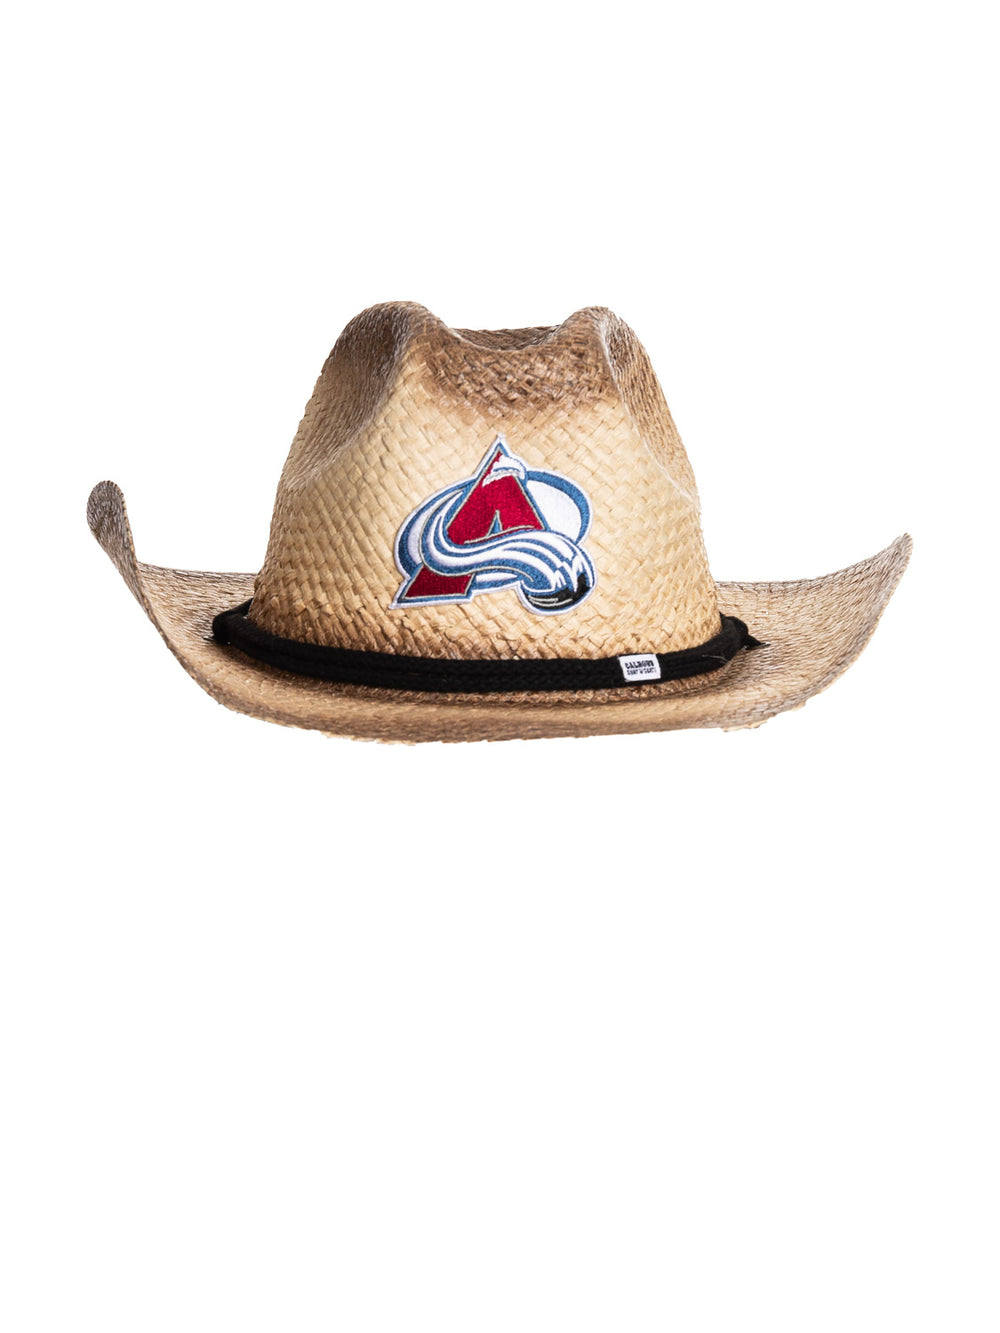 The front of the Colorado Avalanche straw cowboy hat. It is a tan straw hat with the Avalanche logo in the centre of it, with a black rope running along the crown of the hat.